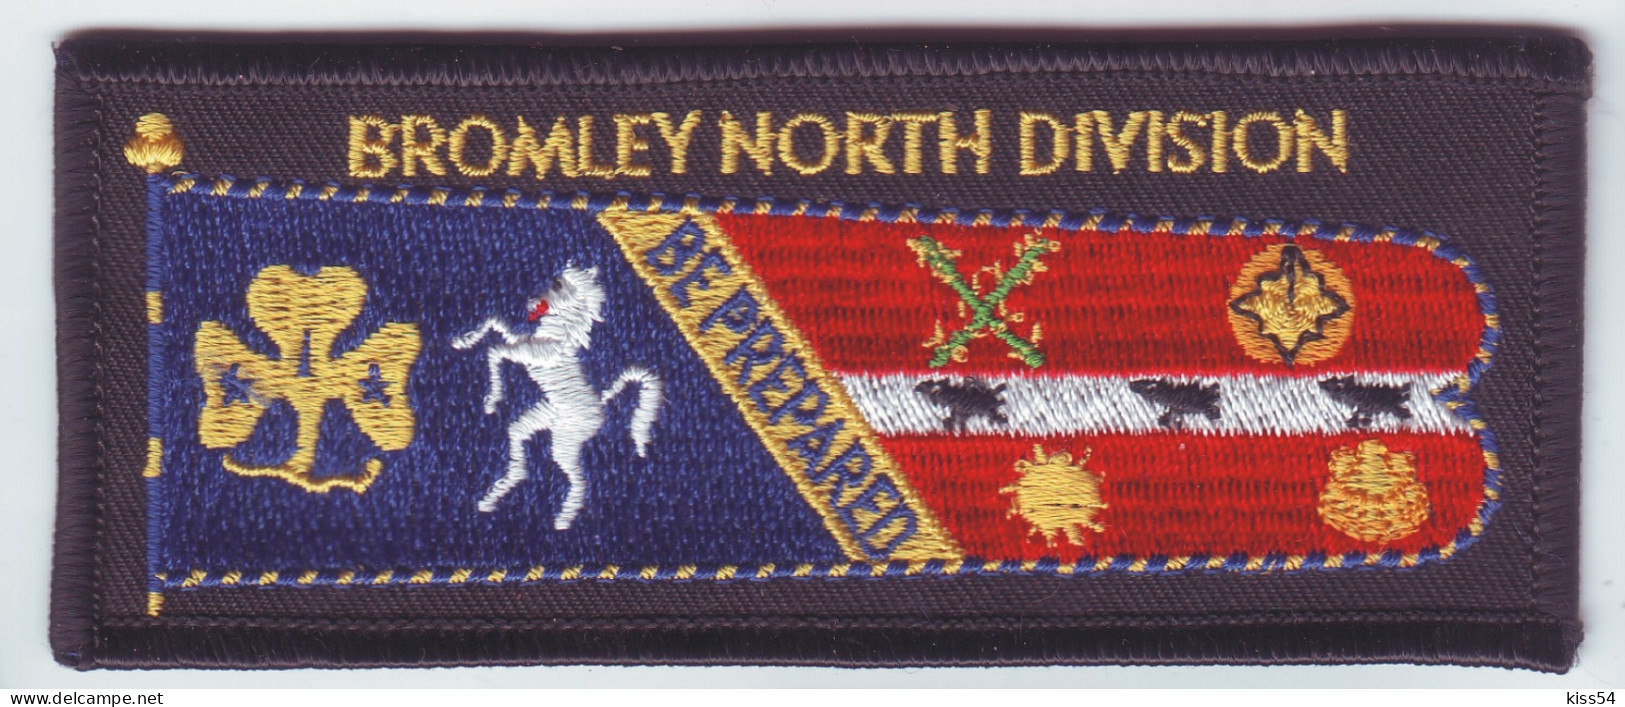 B 22 - 77 UK Scout Badge - Bromley North Division - Movimiento Scout